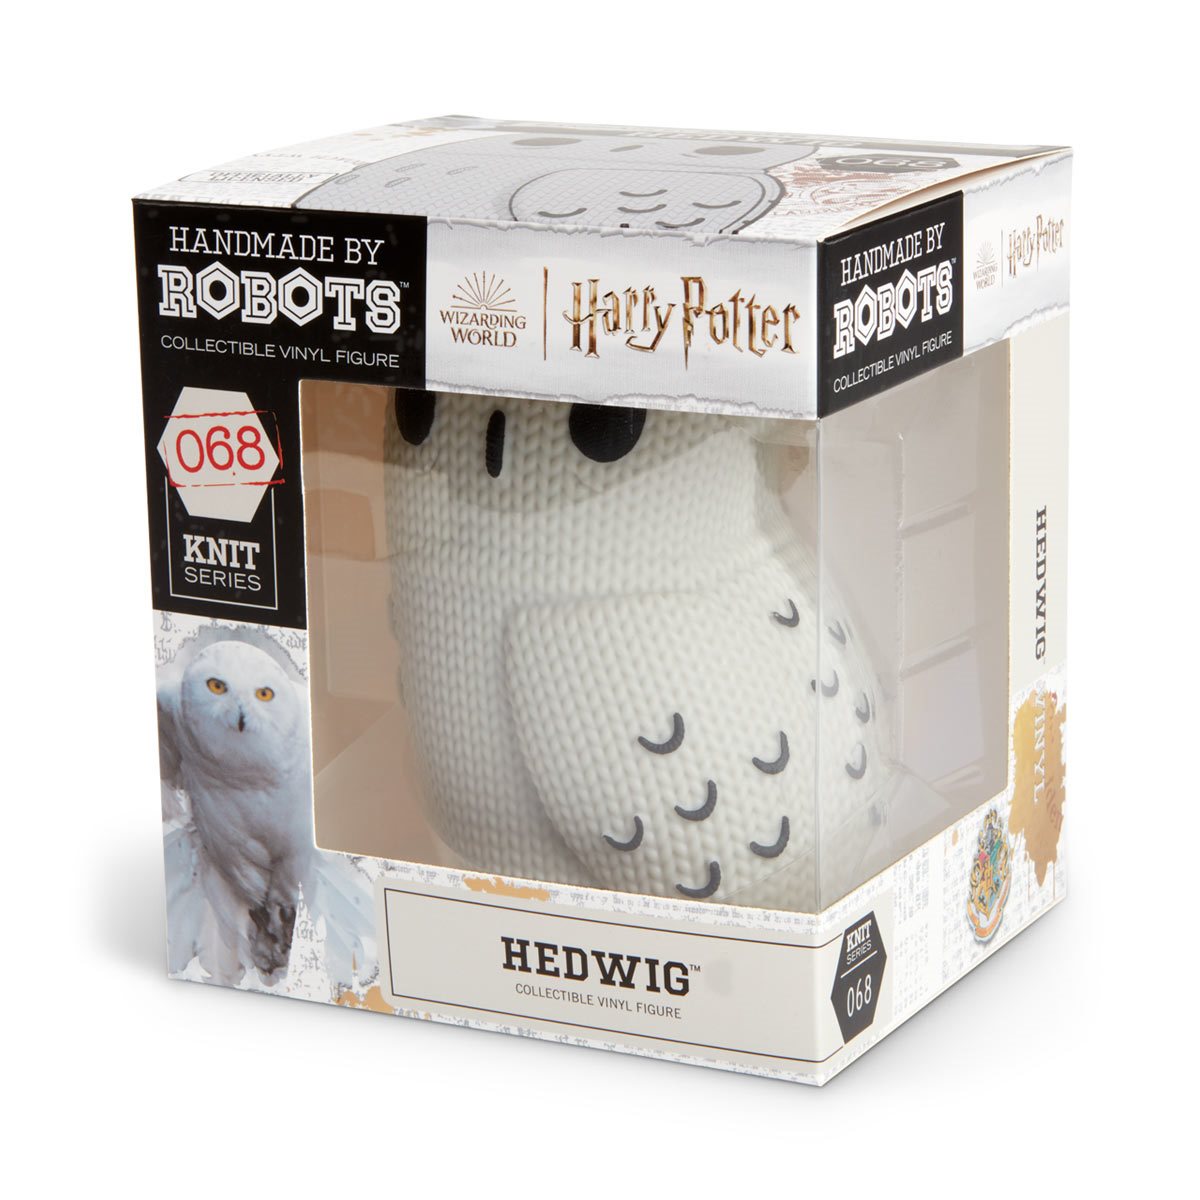 Wizarding World of Harry Potter Handmade By Robots Collectible Vinyl Figures